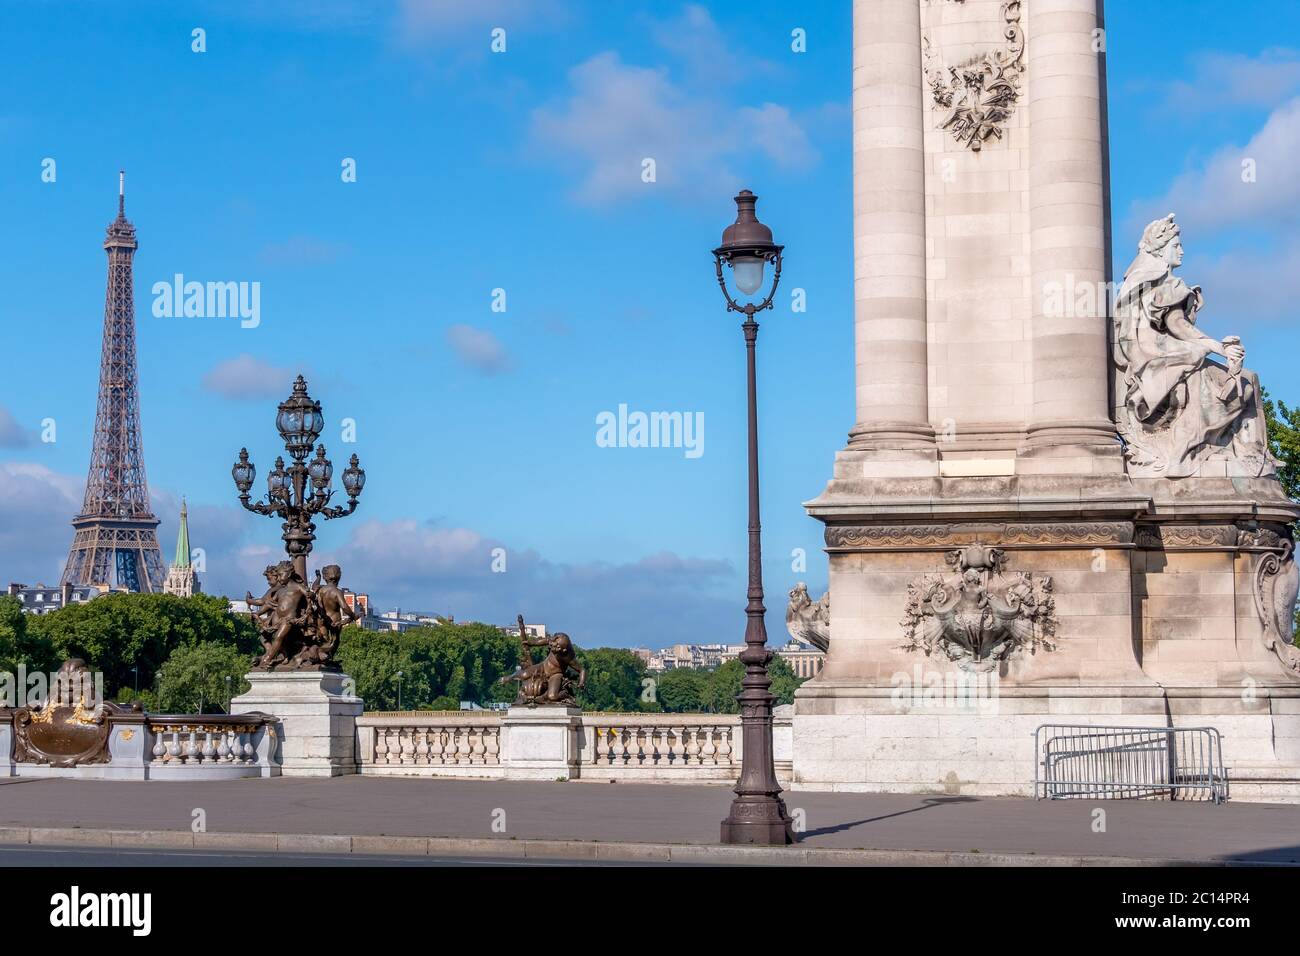 France. Summer sunny day in Paris. Historic column and lanterns on the bridge Alexandre III across the river Seine. Eiffel Tower in the distance Stock Photo